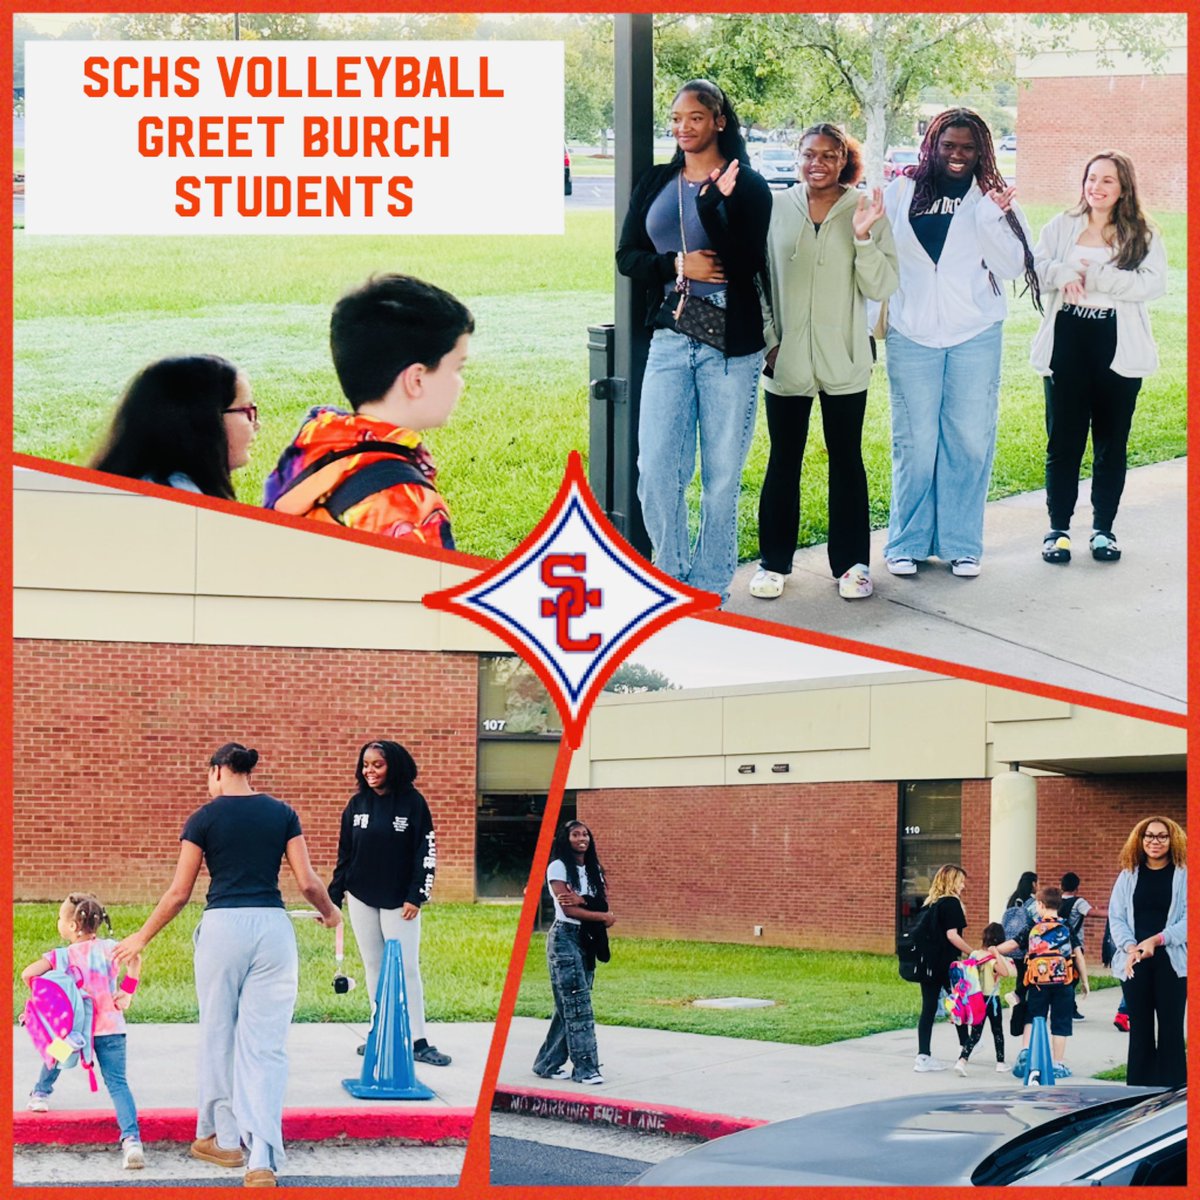 SCHS Volleyball (Juniors and Seniors) greeted students at Burch Elementary this morning! We enjoyed it just as much as the students did.❤️🏐💙 #community #sandycreek #burch #jenkinsrdkids #volleyball #volleyballgirls #schs
@SCHS_Patriots @TishayLewis1 @TROliverEDU @Coach_CGreen